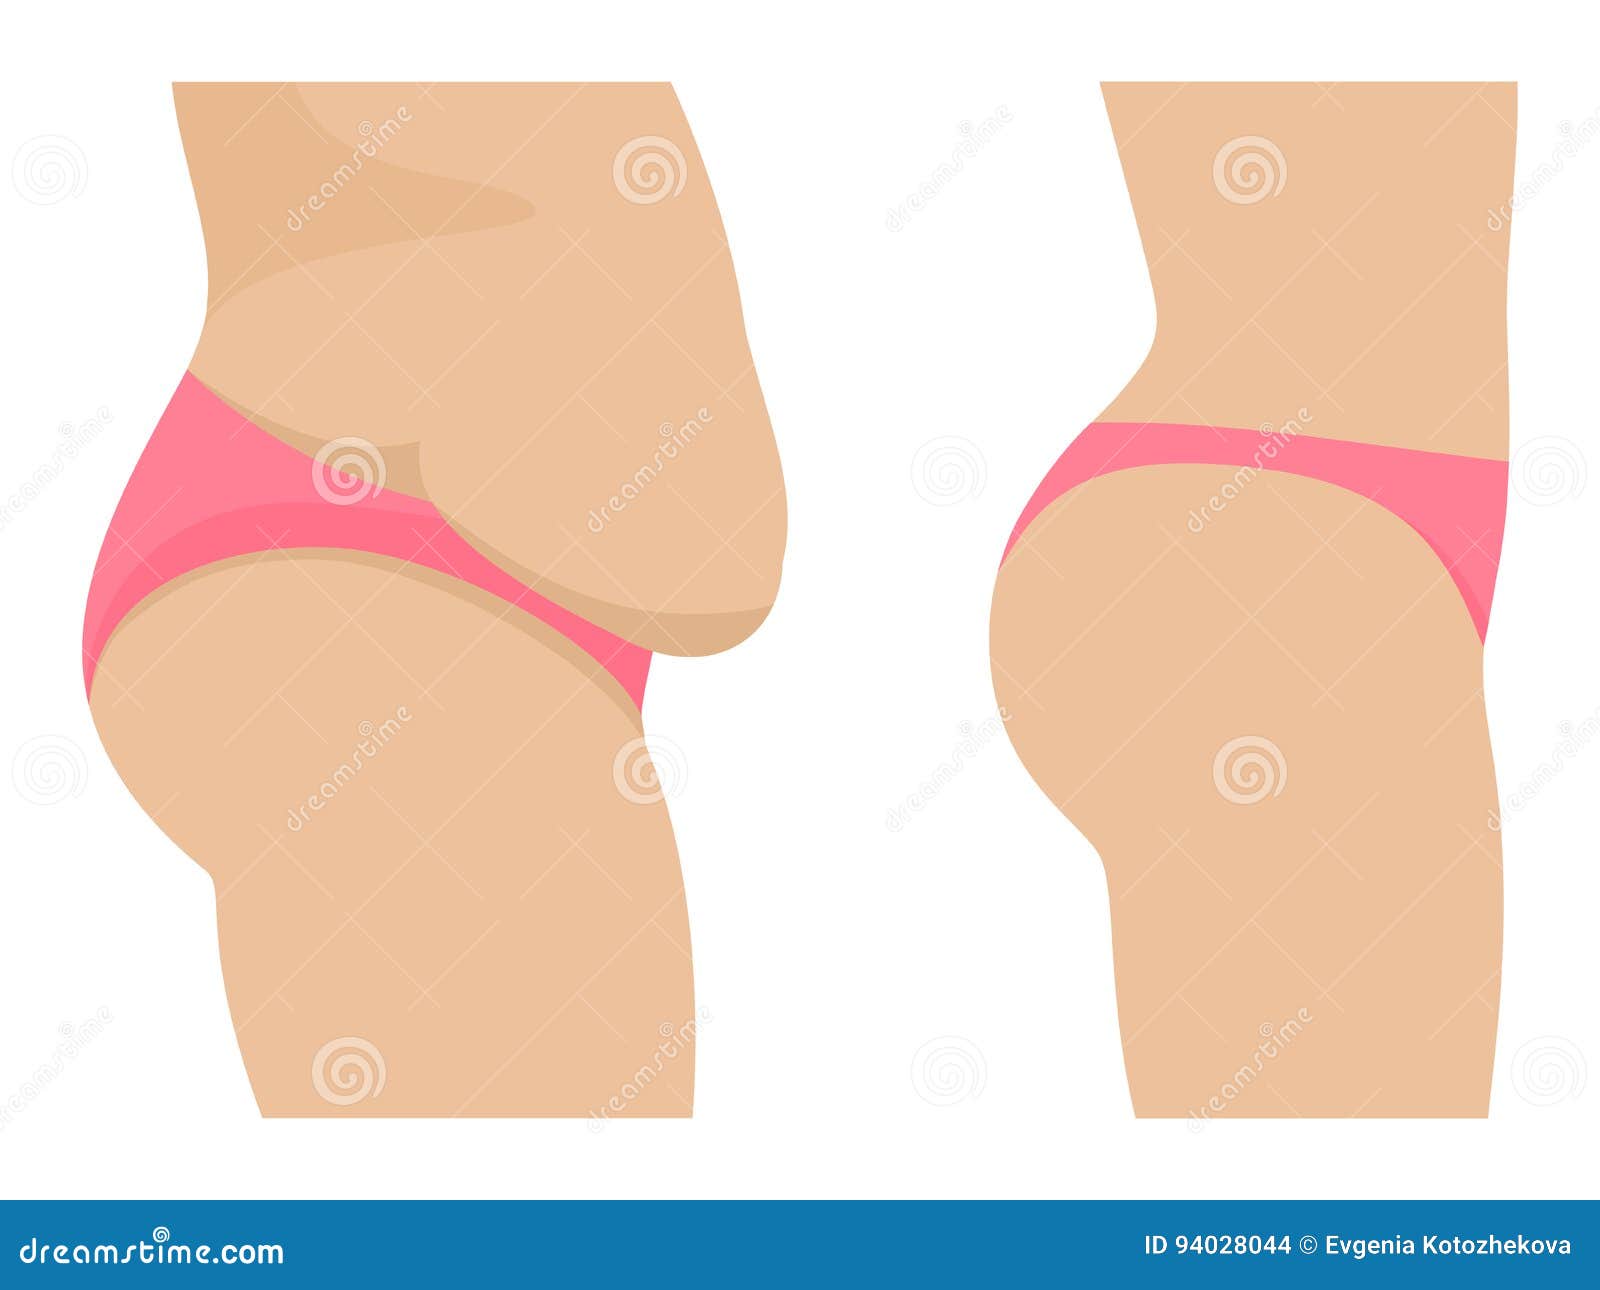  female abdomen before after losing weight